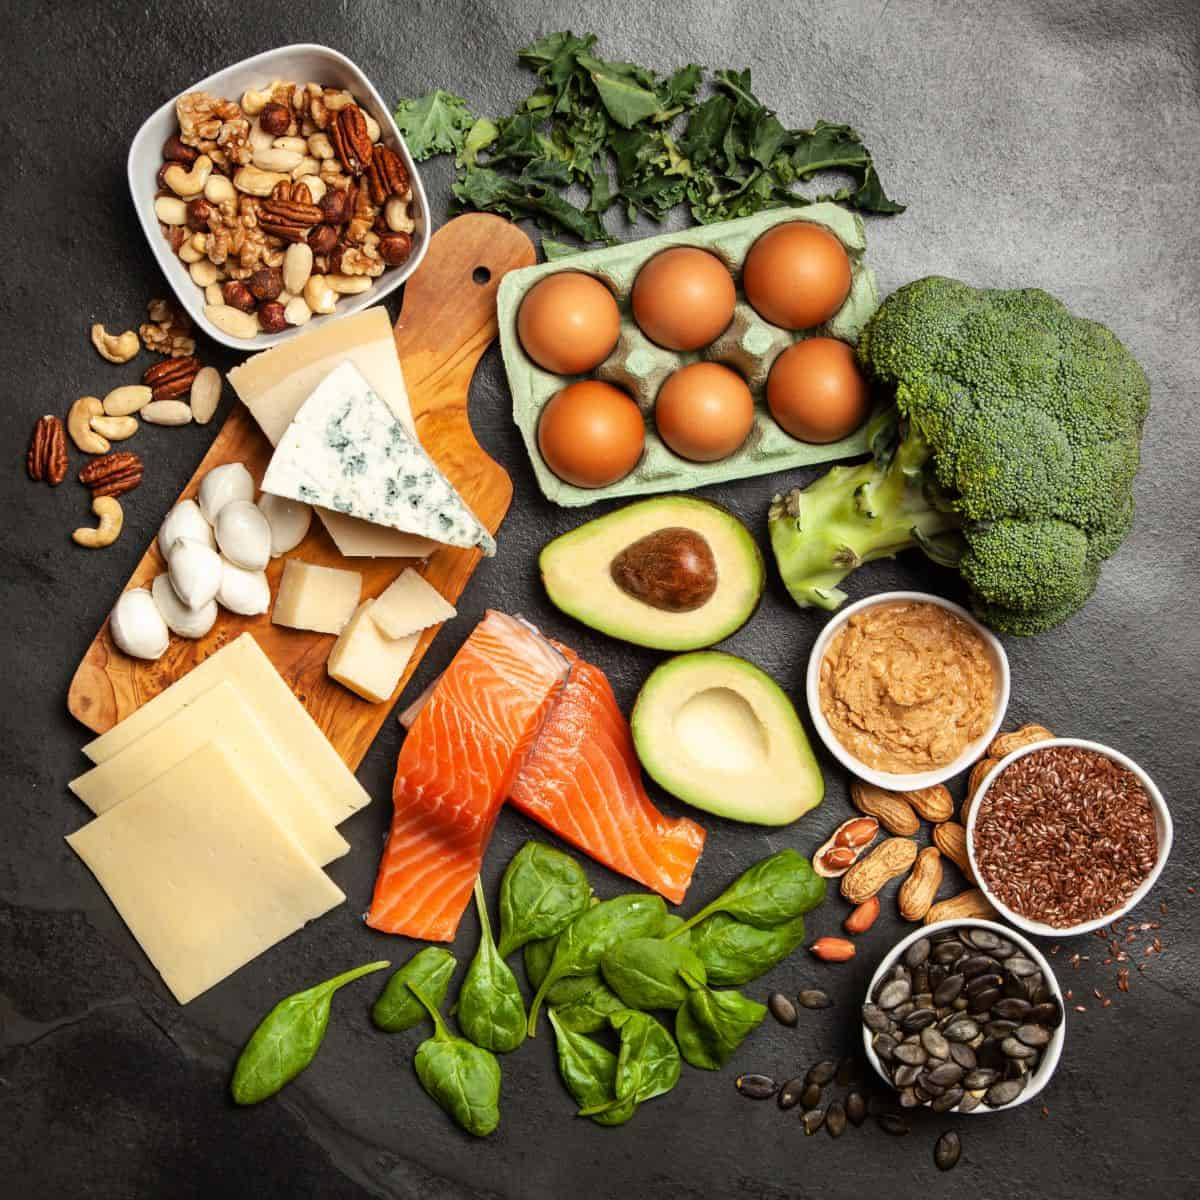 Clean keto ingredients on a table: spinach, seeds, nuts, fish, cheese, eggs, avocado, nut butter, broccoli, and arugula.